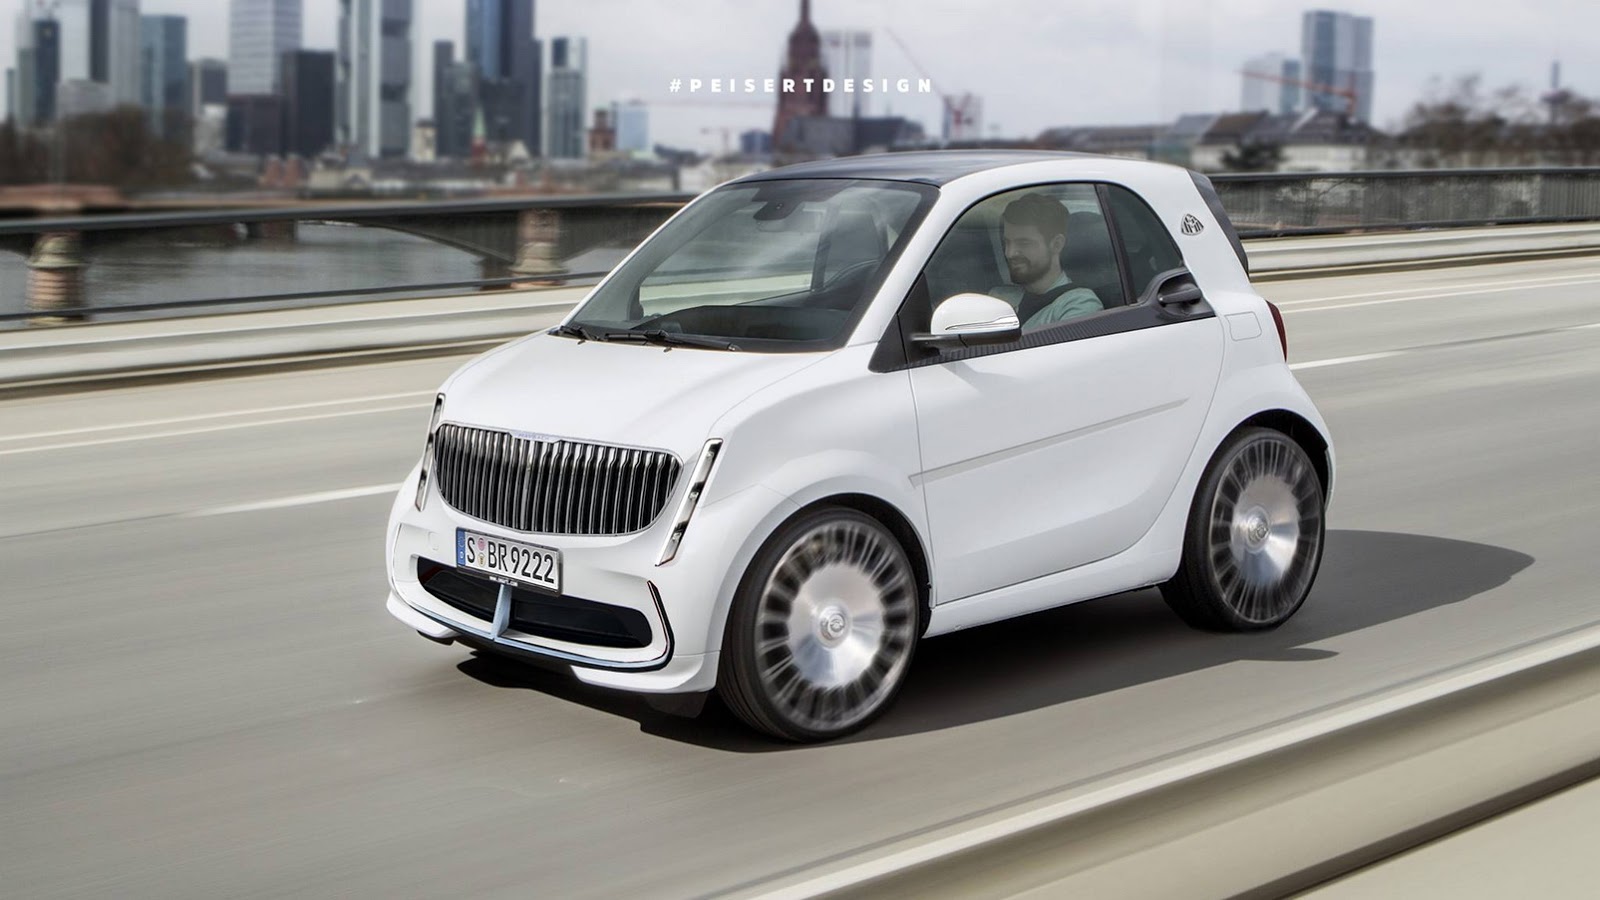 , smart-fortwo-maybach-render-1: smart-fortwo-maybach-render-1